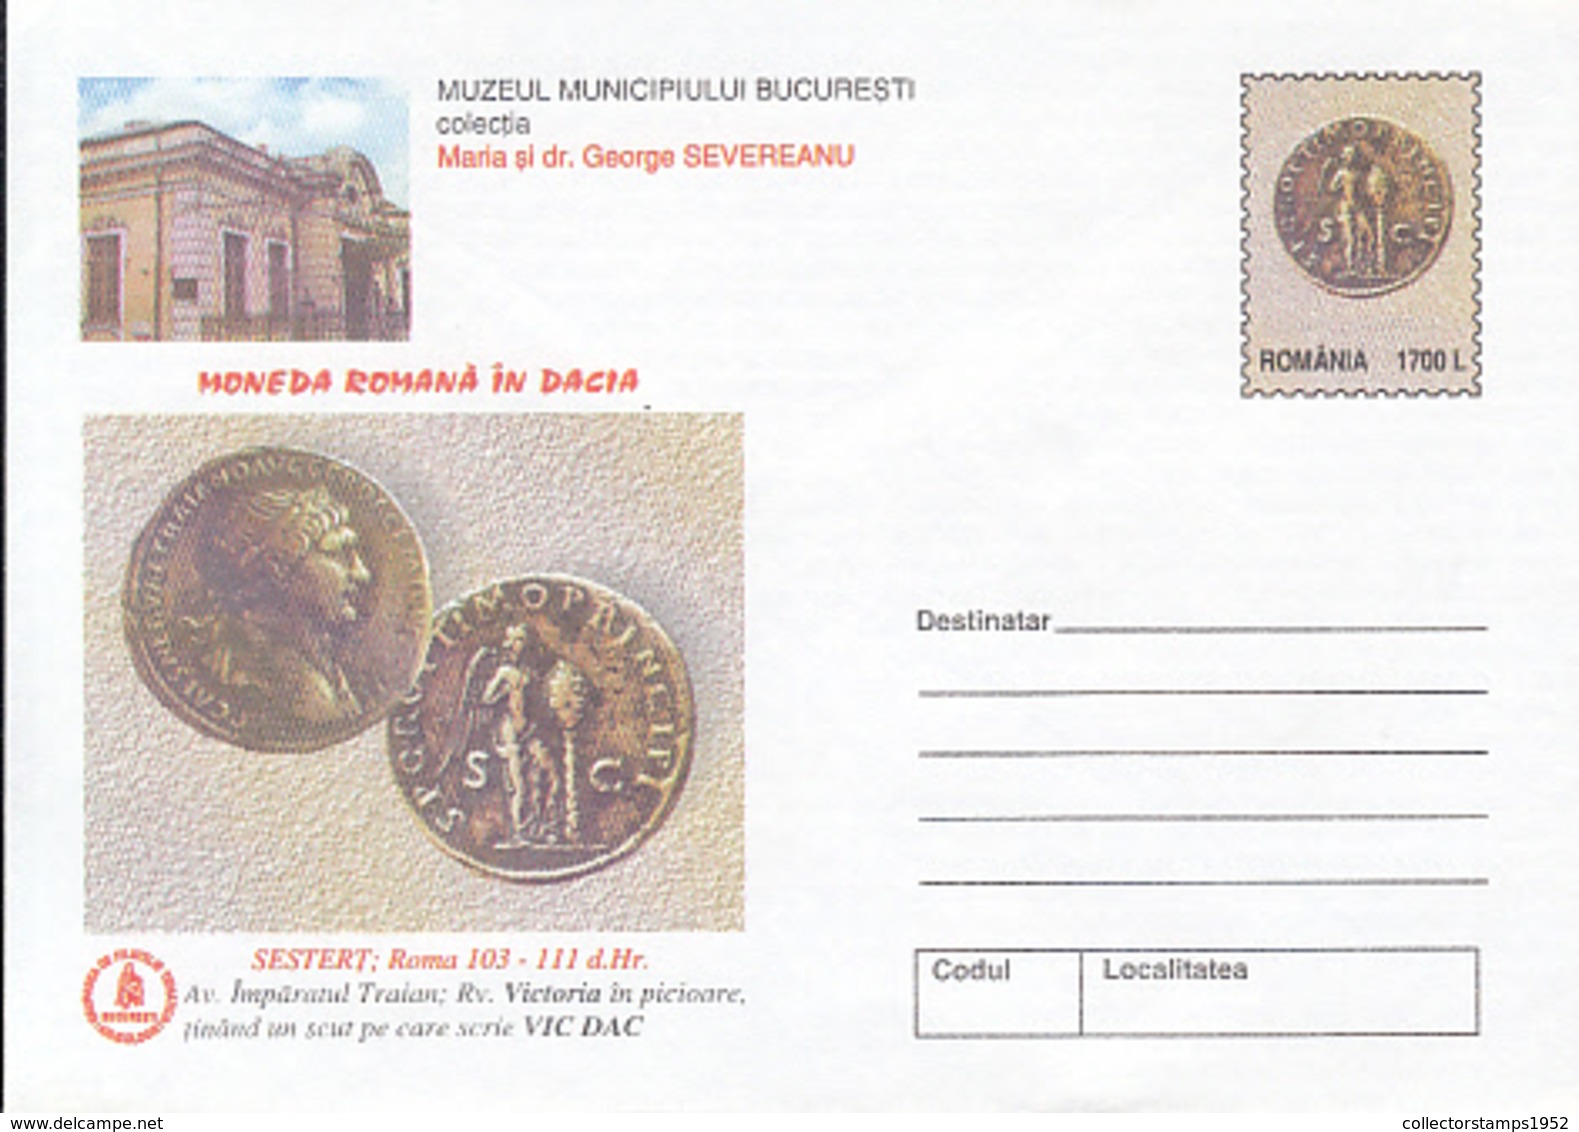 89367- ROMAN COIN IN DACIA, ANCIENT RELICS, ARCHAEOLOGY, COVER STATIONERY, 2000, ROMANIA - Archéologie